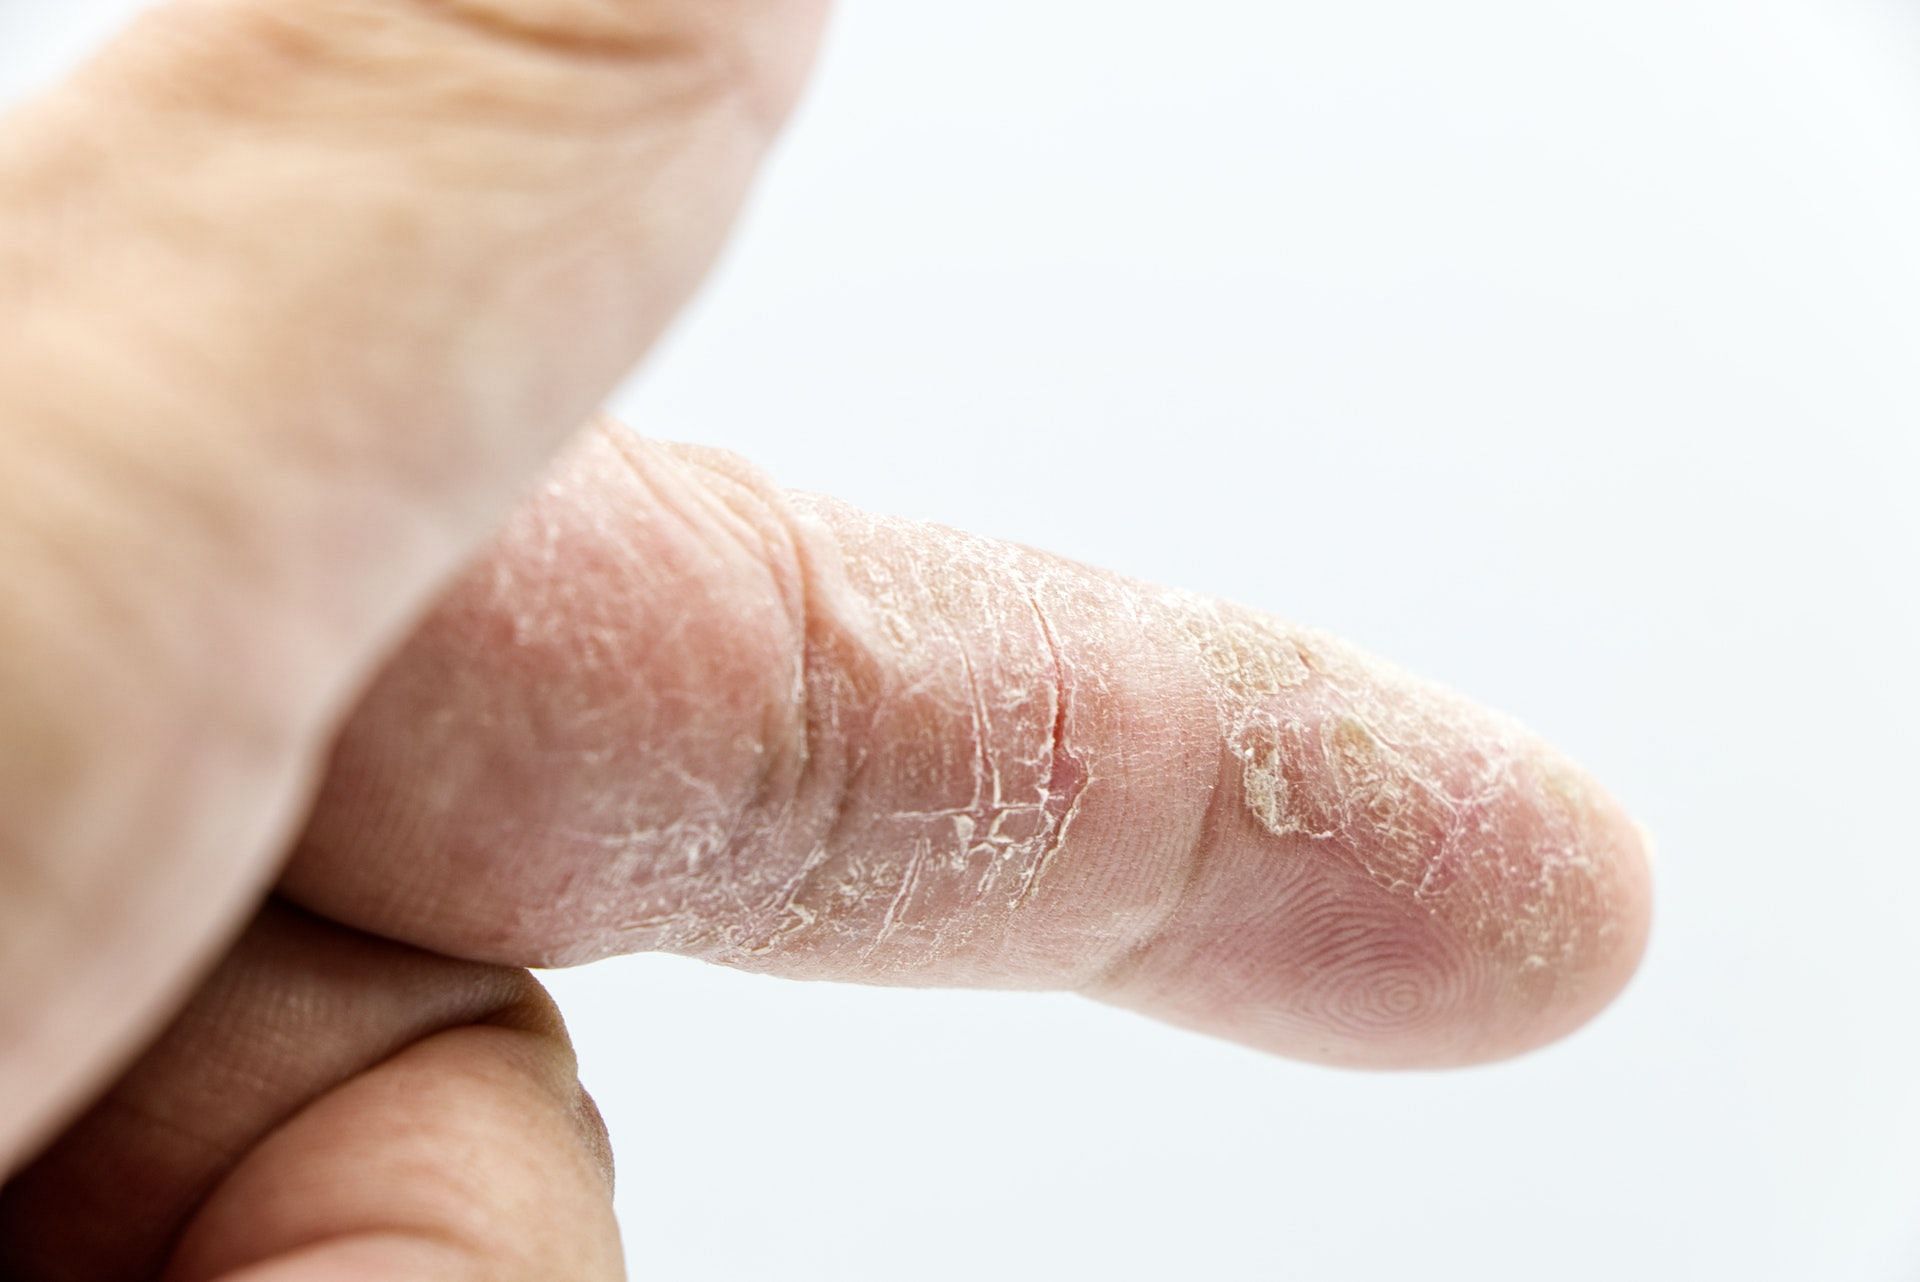 Different types of rashes can occur anywhere in the body. (Photo via Pexels/Srattha Nualsate)